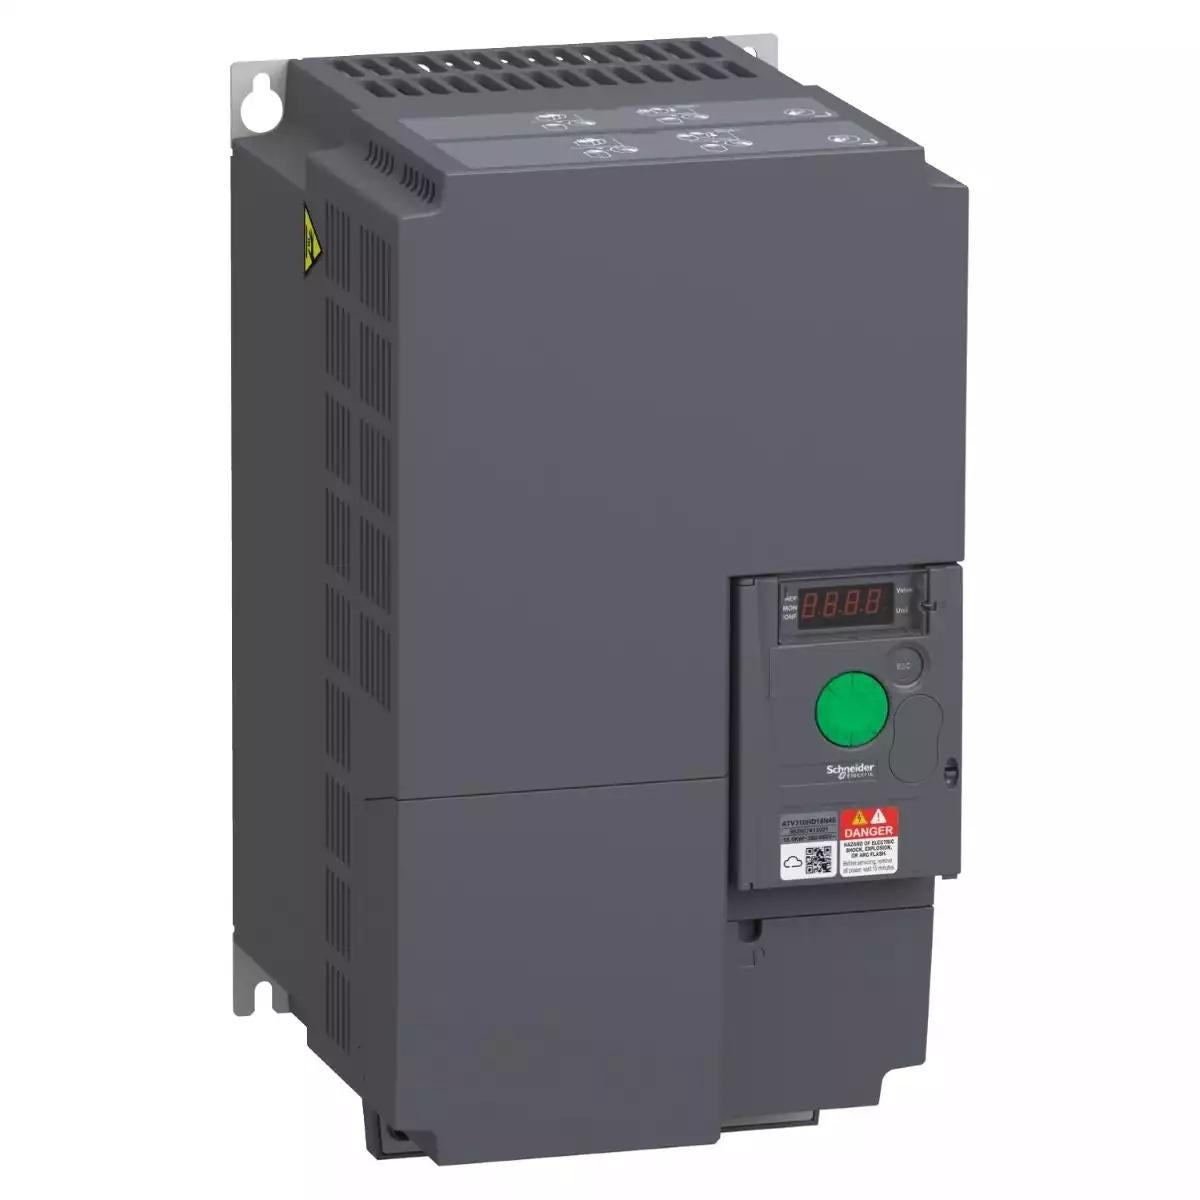 variable speed drive ATV310, 18.5 kW, 25 hp, 380...460 V, 3 phase, without filter